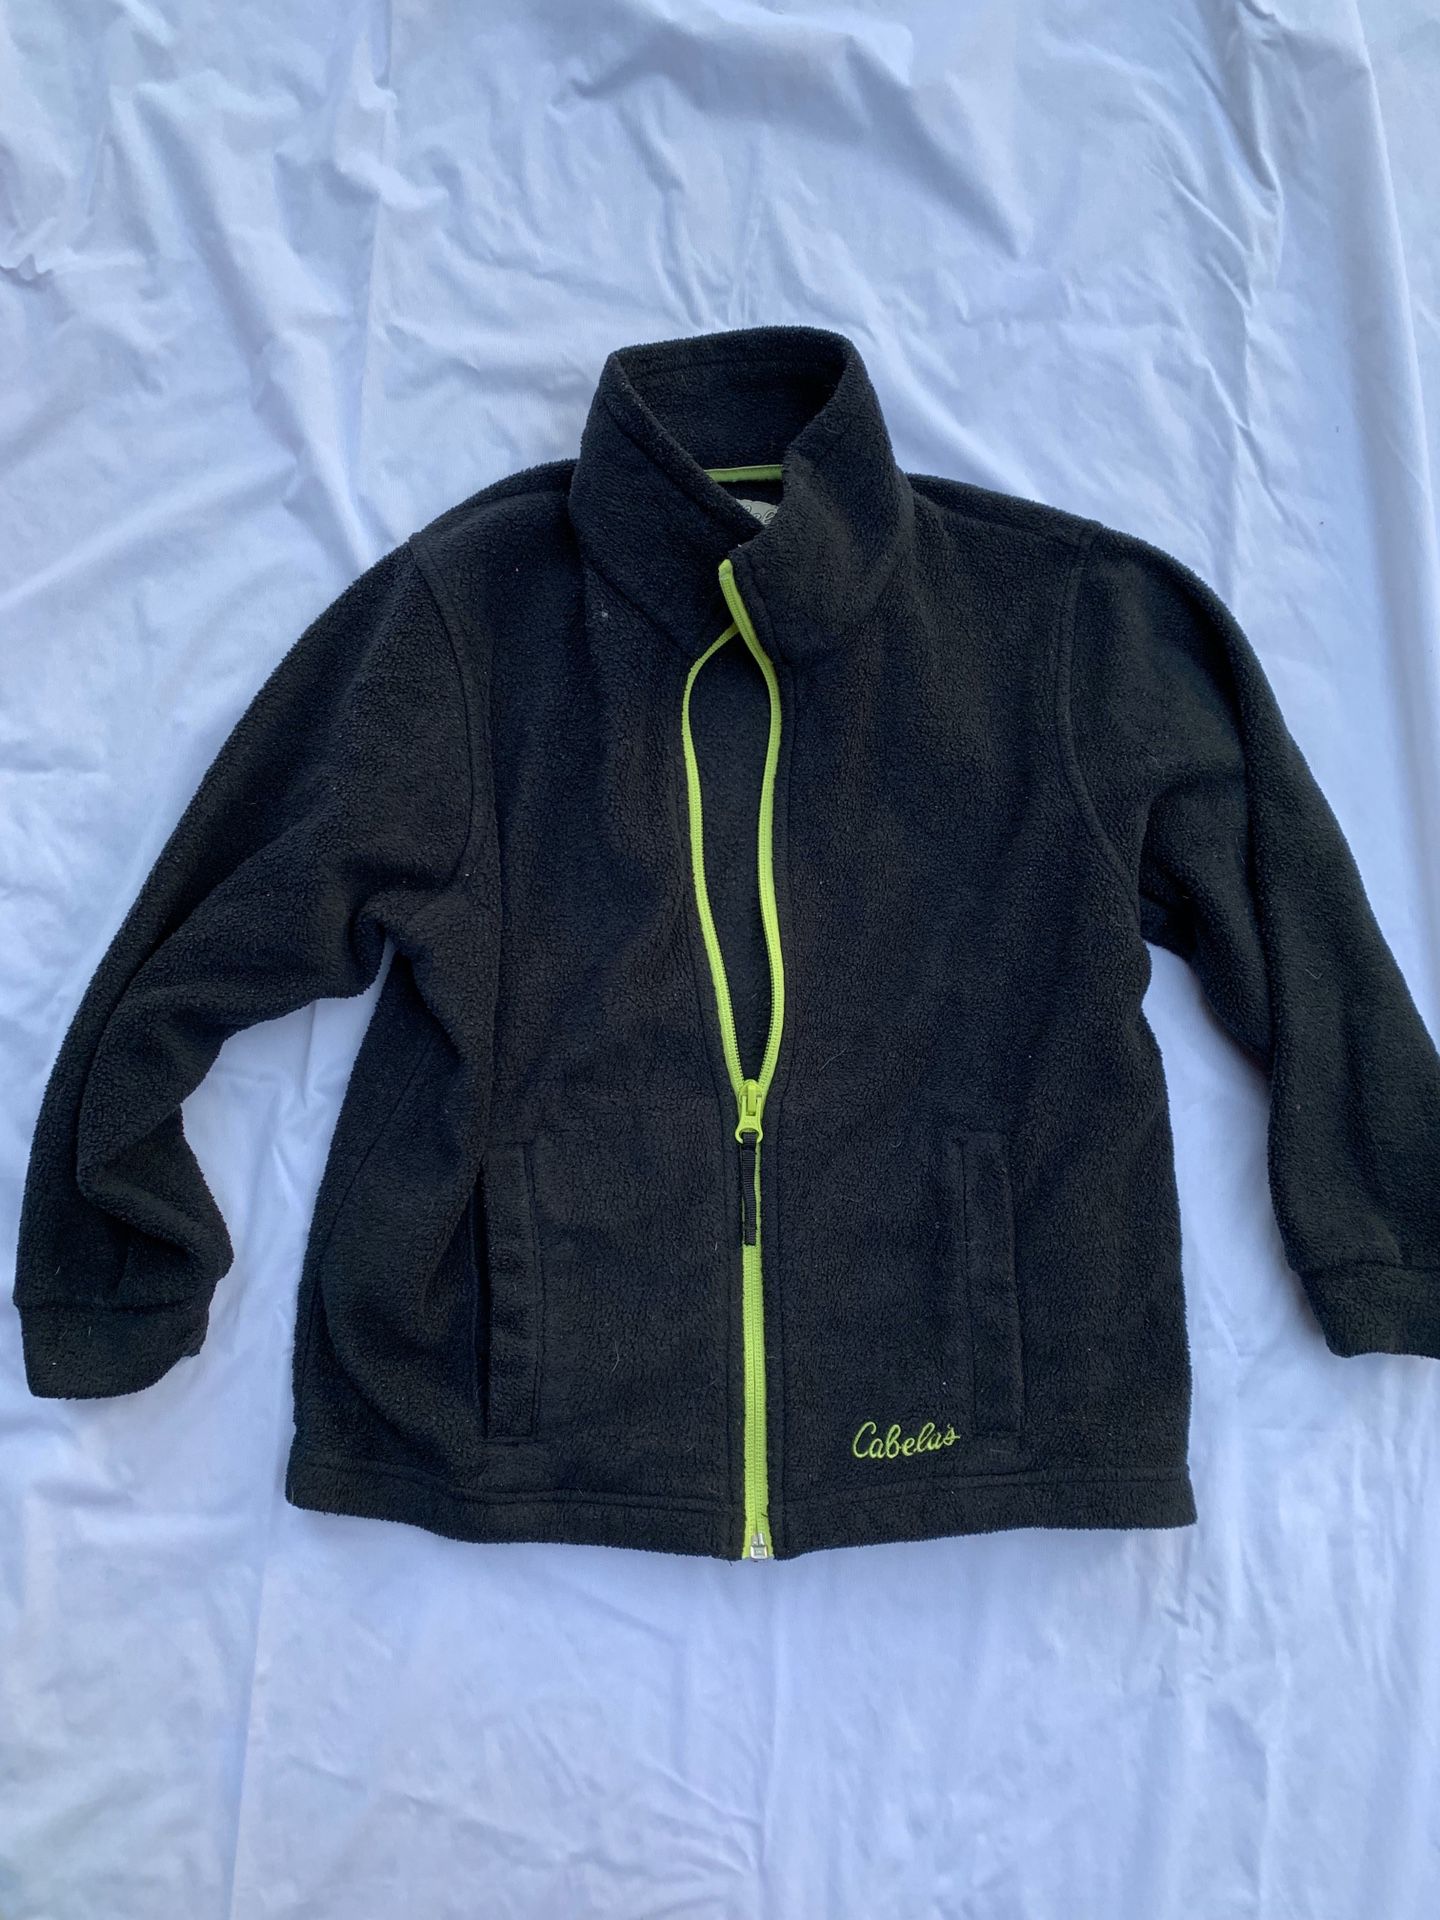 Cabela s black fleece youth size xs 6/7 lime green piping , emblems and zipper